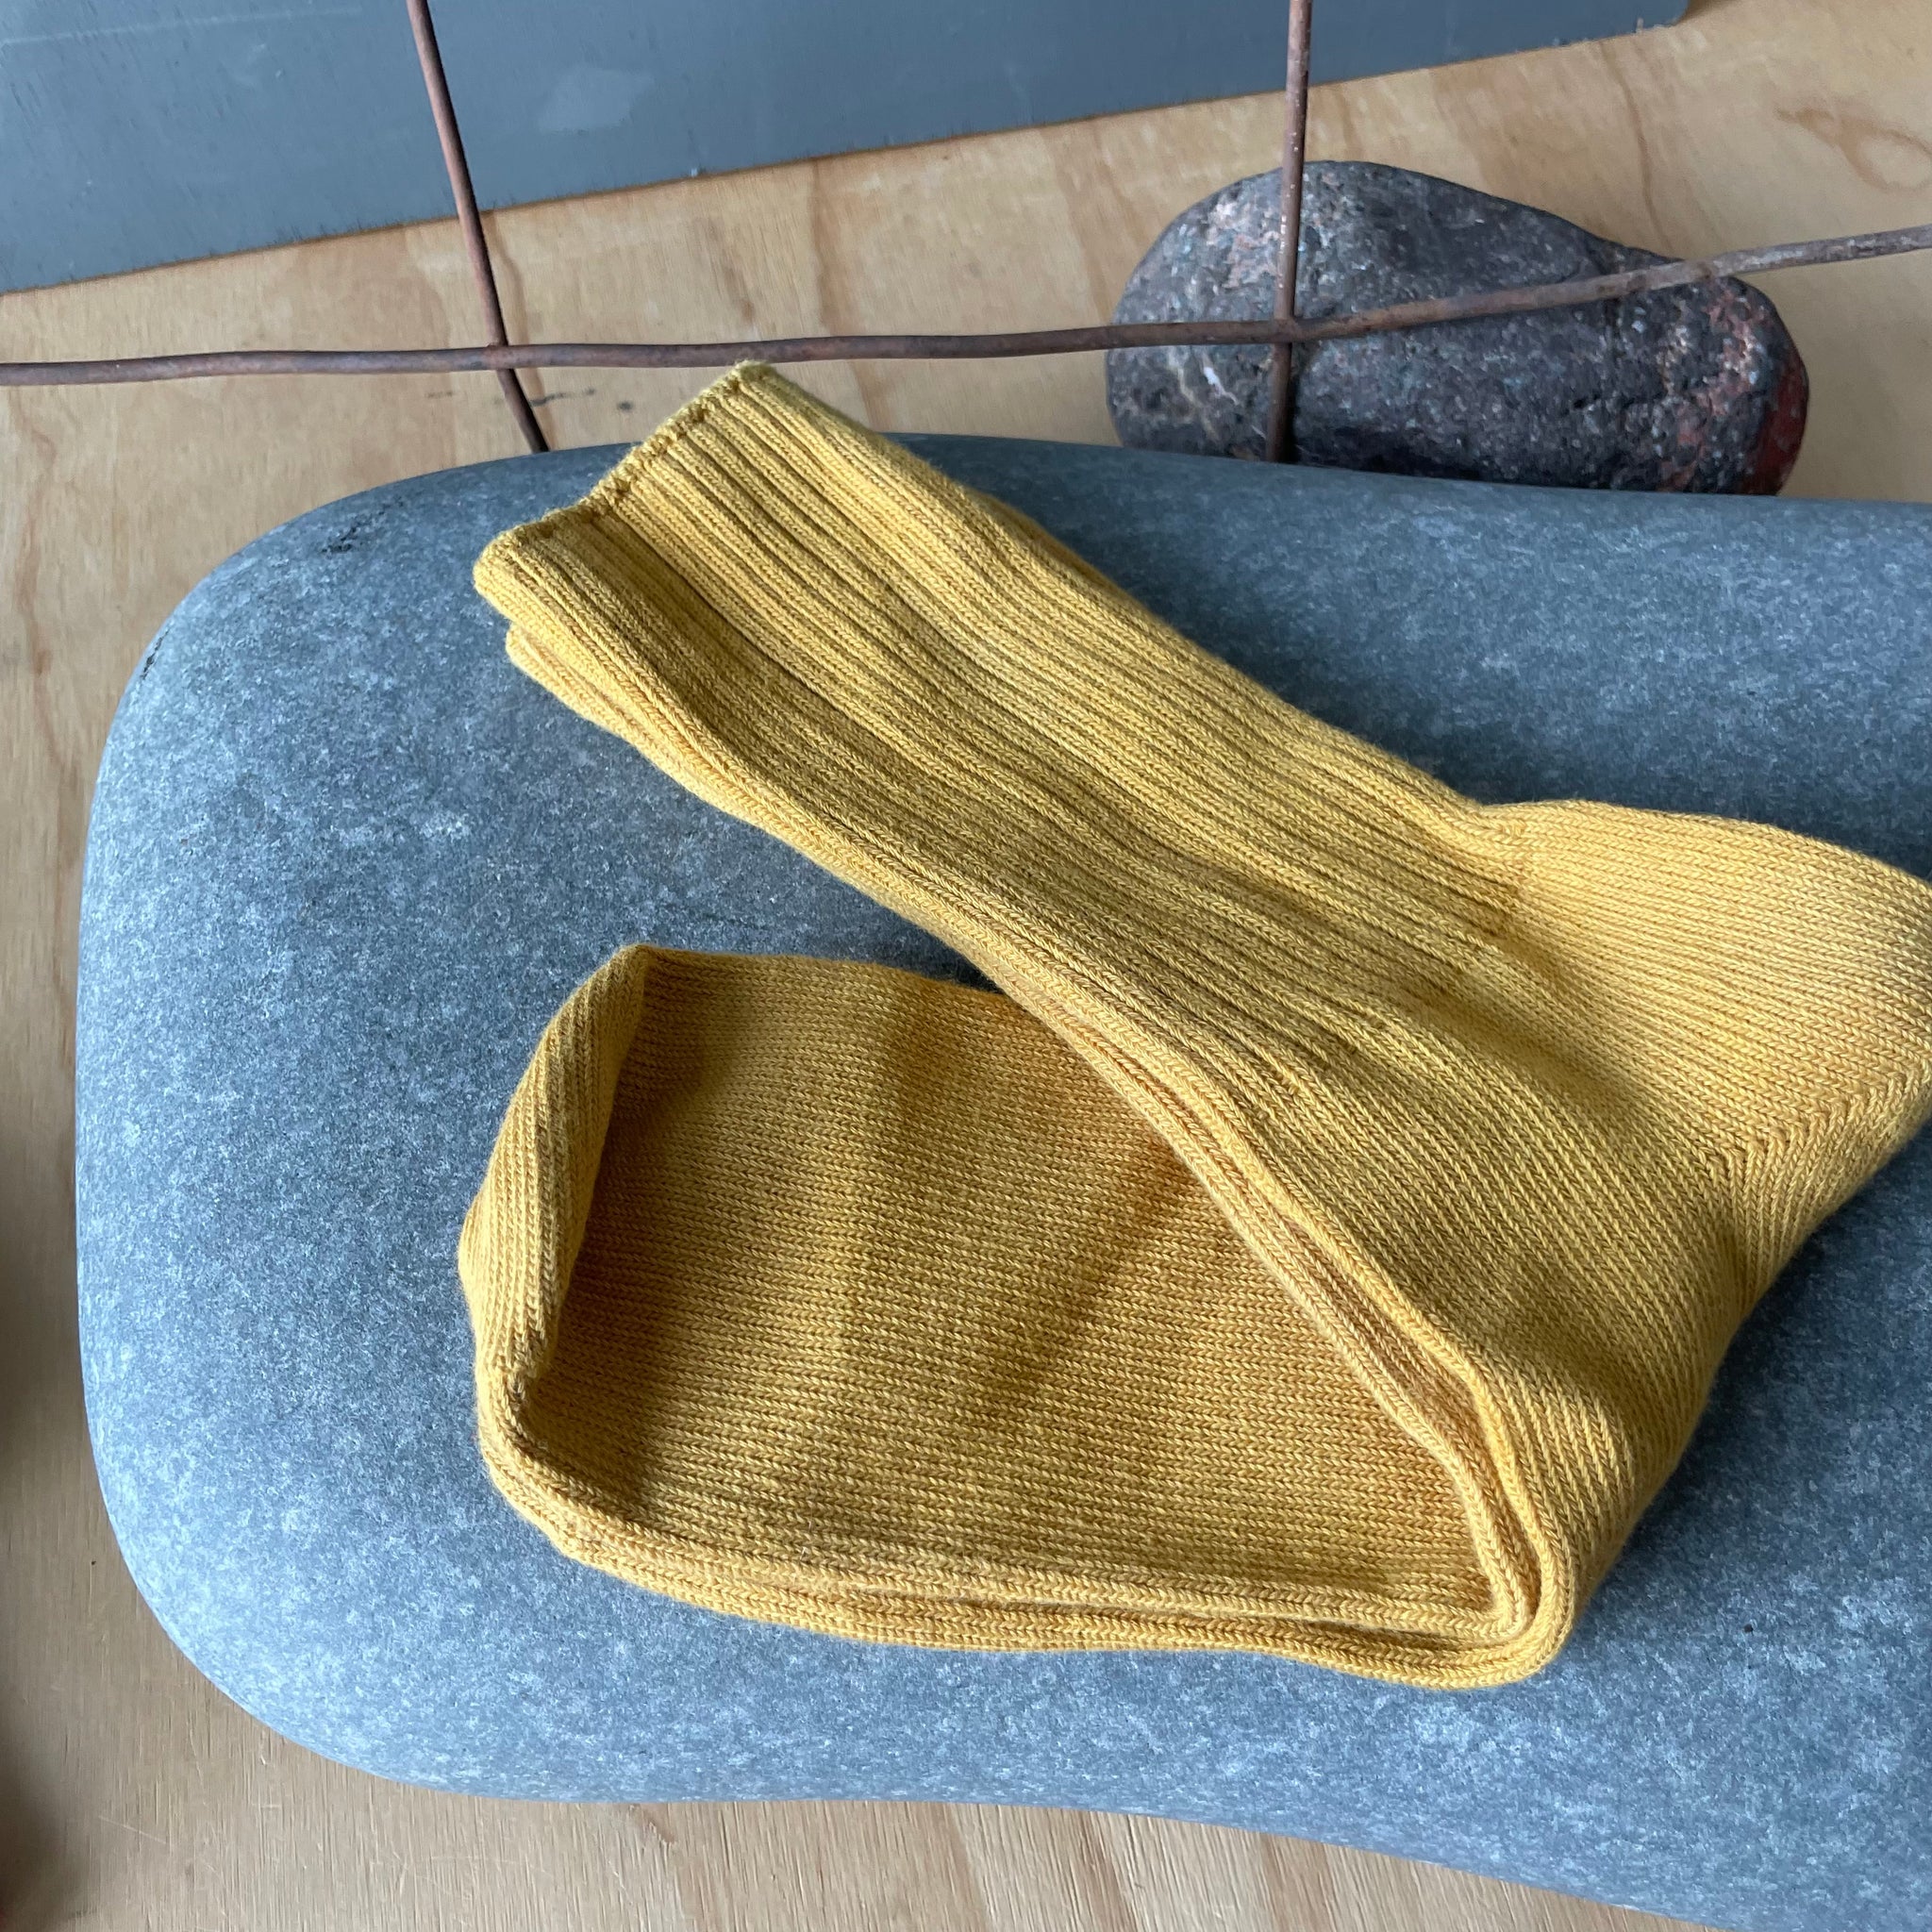 Hand Dyed Cotton Socks in Warm Tones by Scarfshop